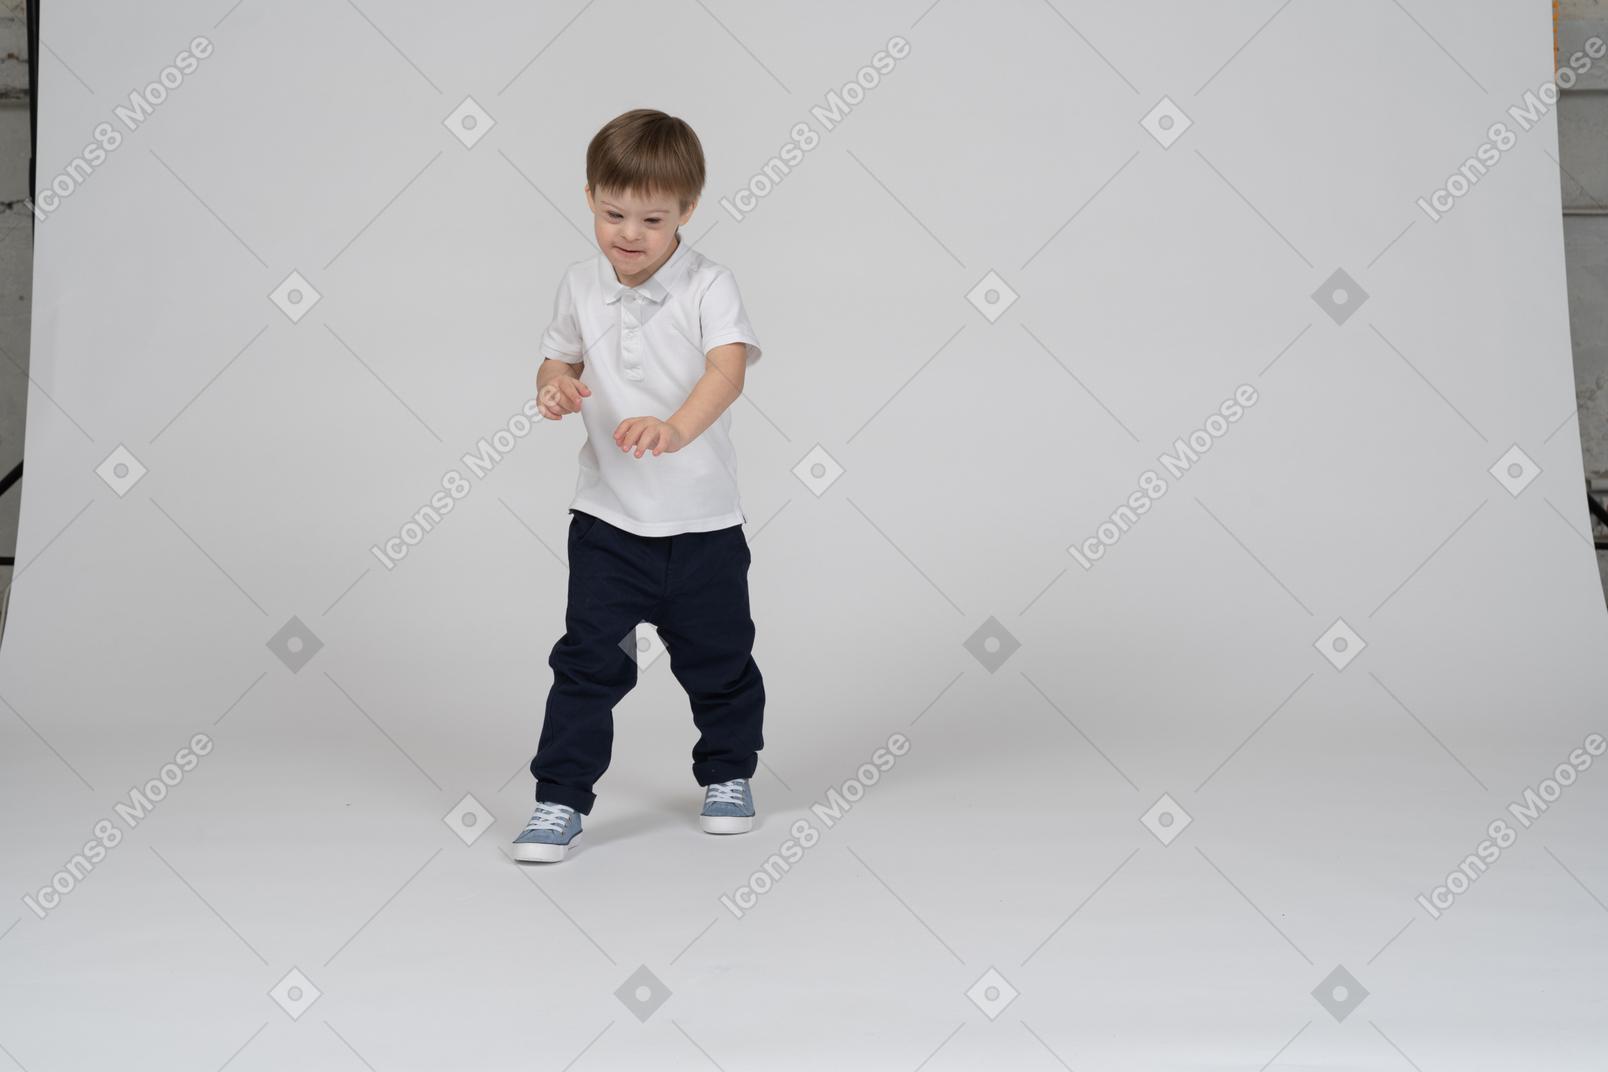 Front view of a boy stepping forward and looking down smiling